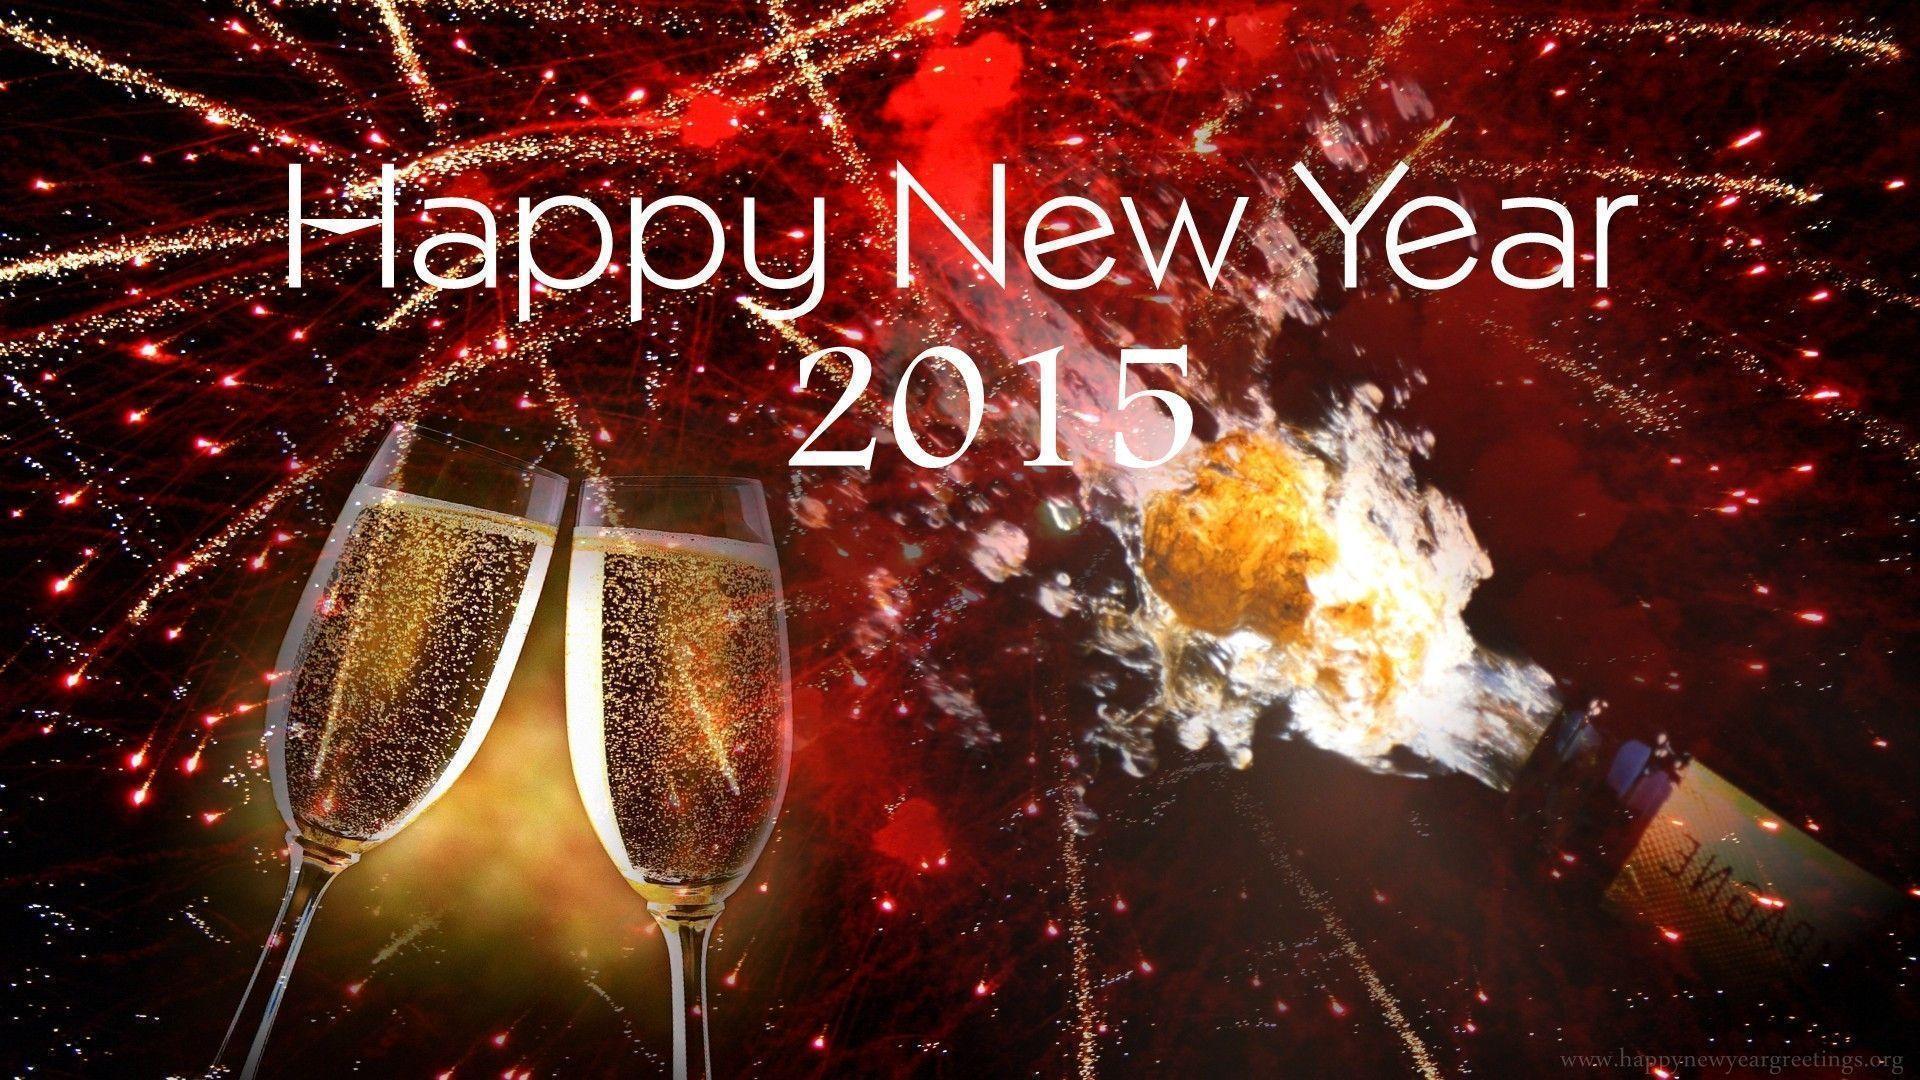 Happy New Year 2015 Image, Picture, Greetings, Wallpaper, Cards